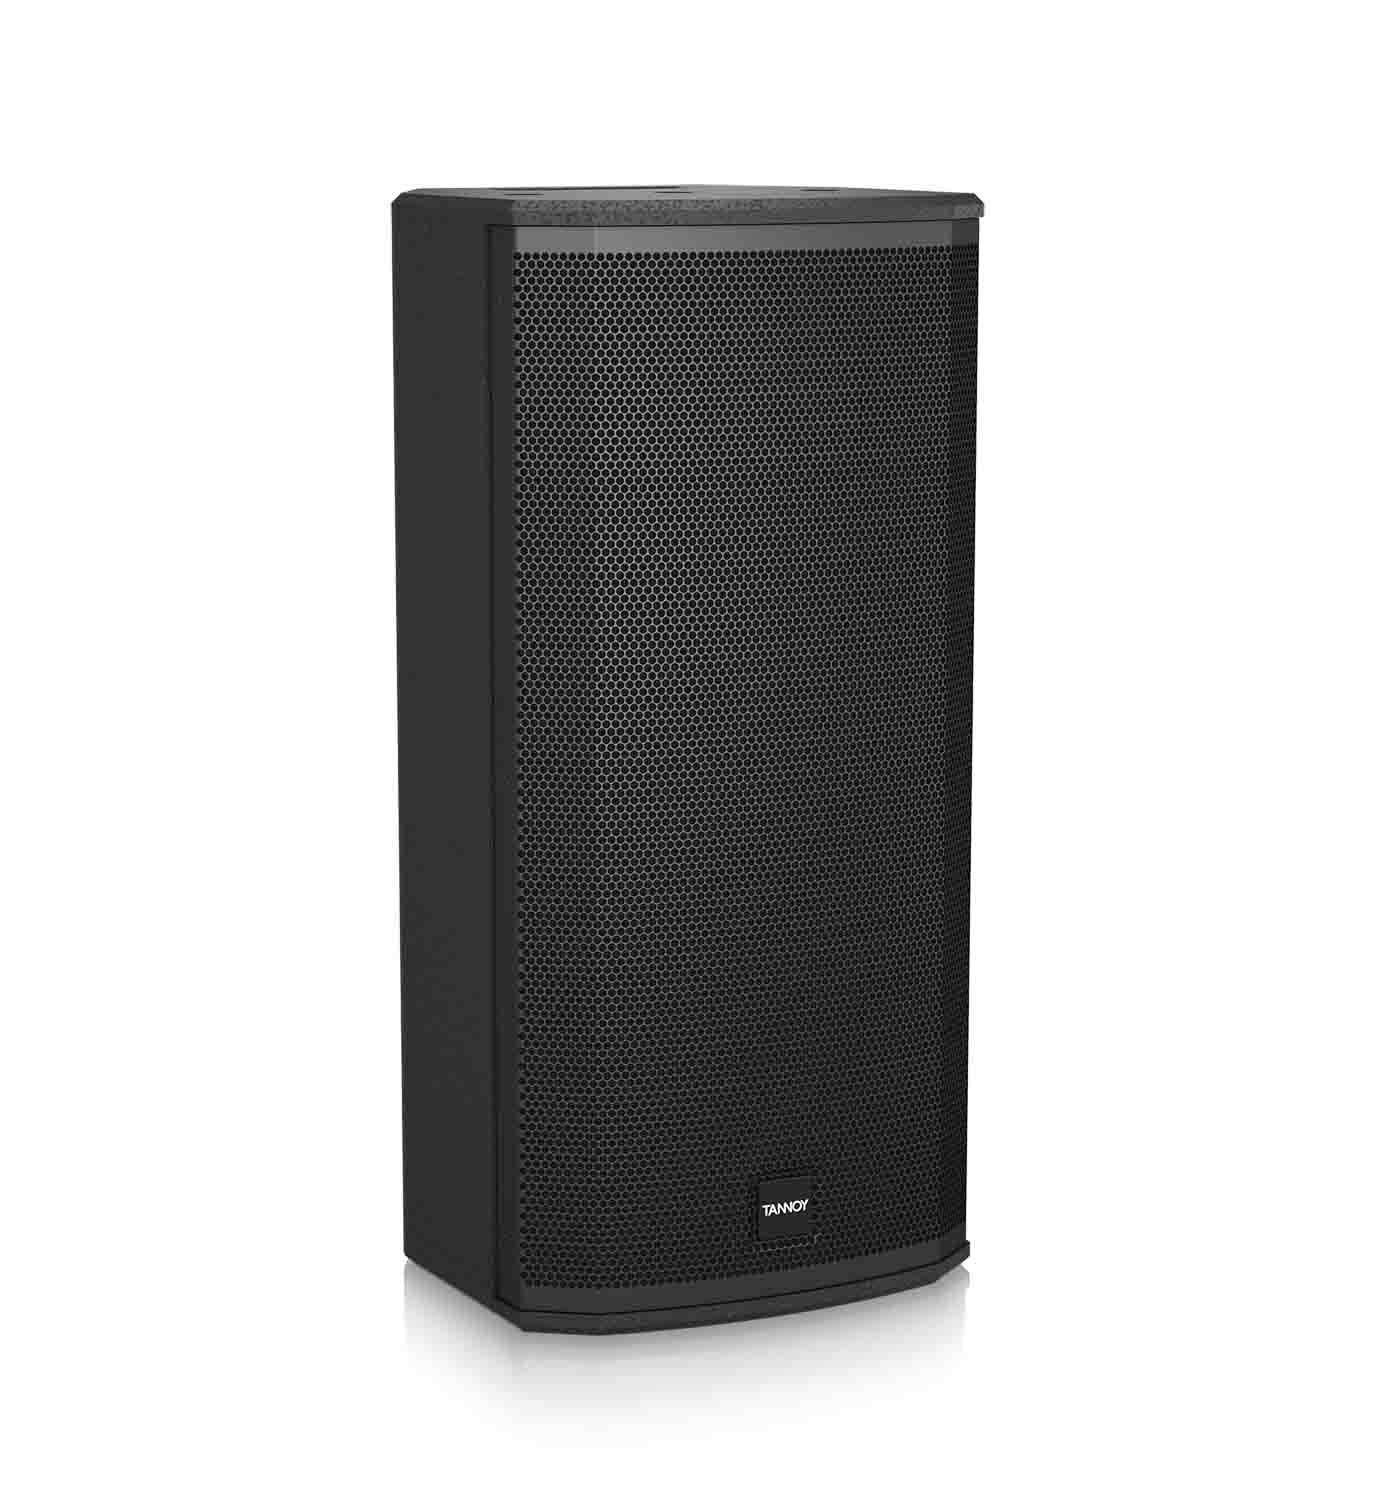 Tannoy VX 8.2 Dual Concentric Full Range Loudspeaker with Low-Frequency Driver for Portable and Installation Applications - Hollywood DJ